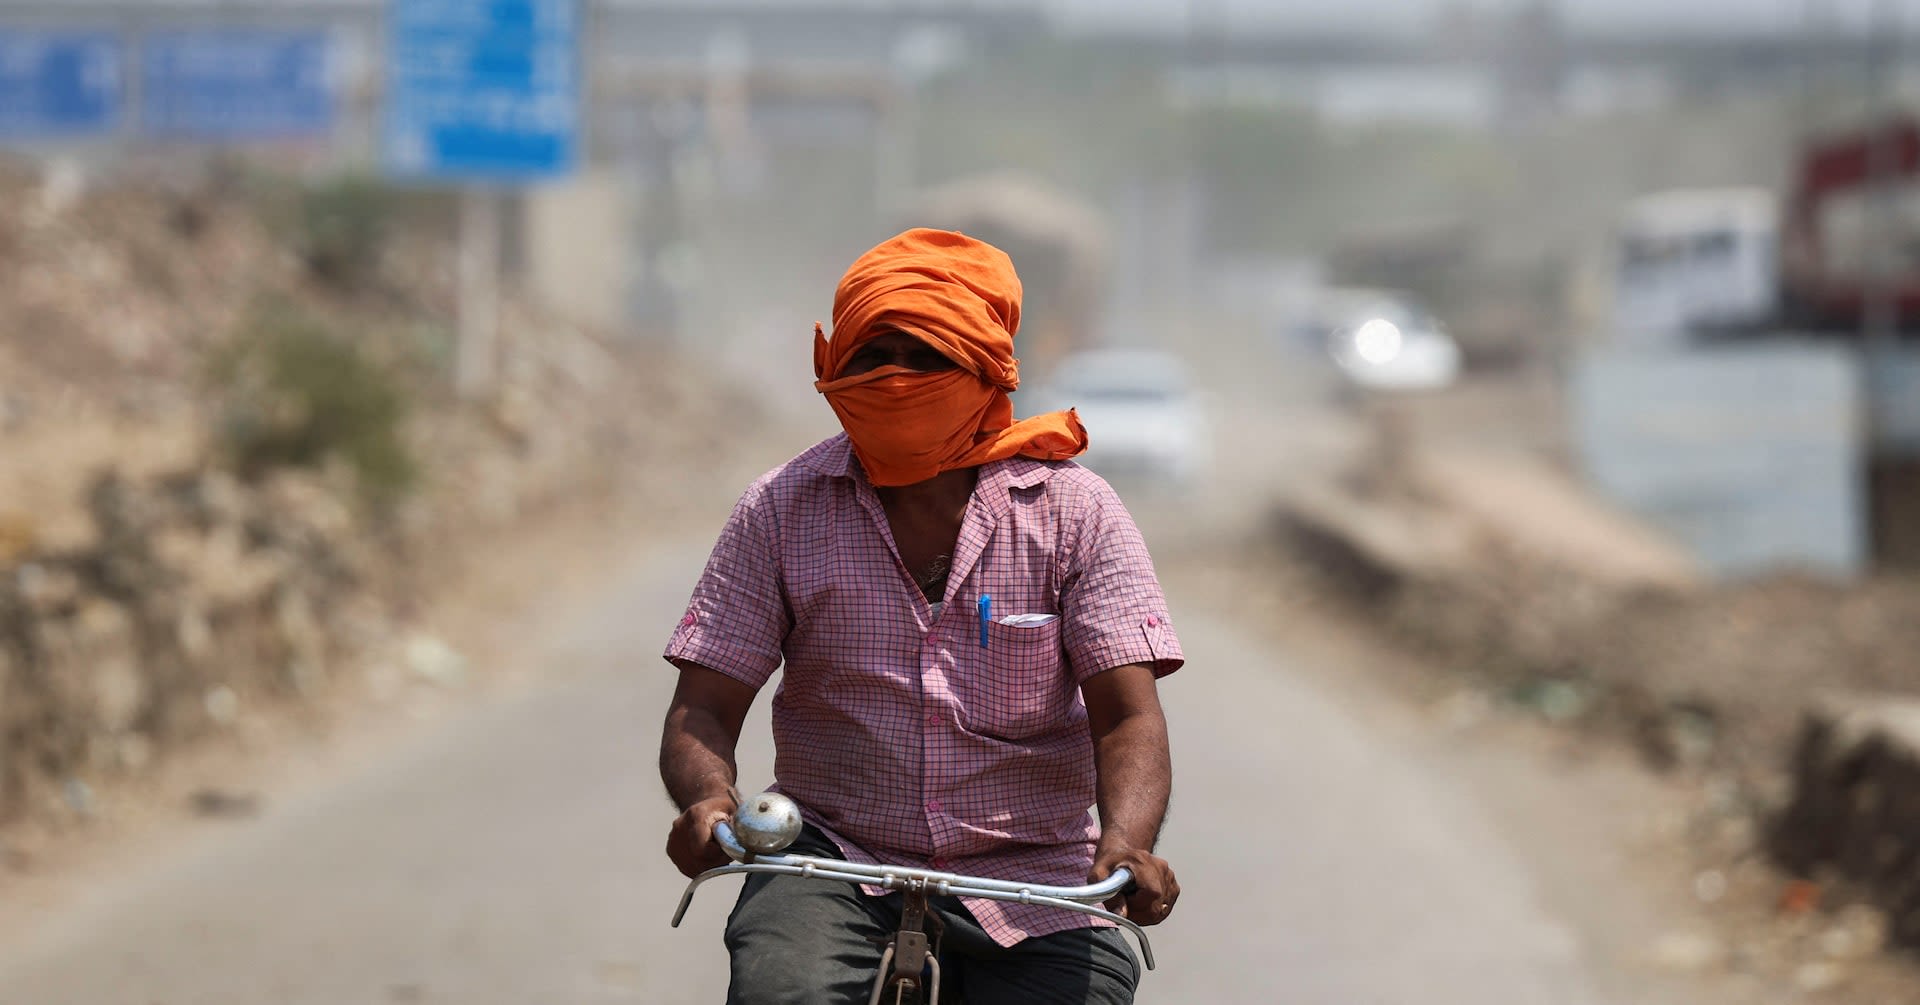 Why have temperatures reached record highs in India?